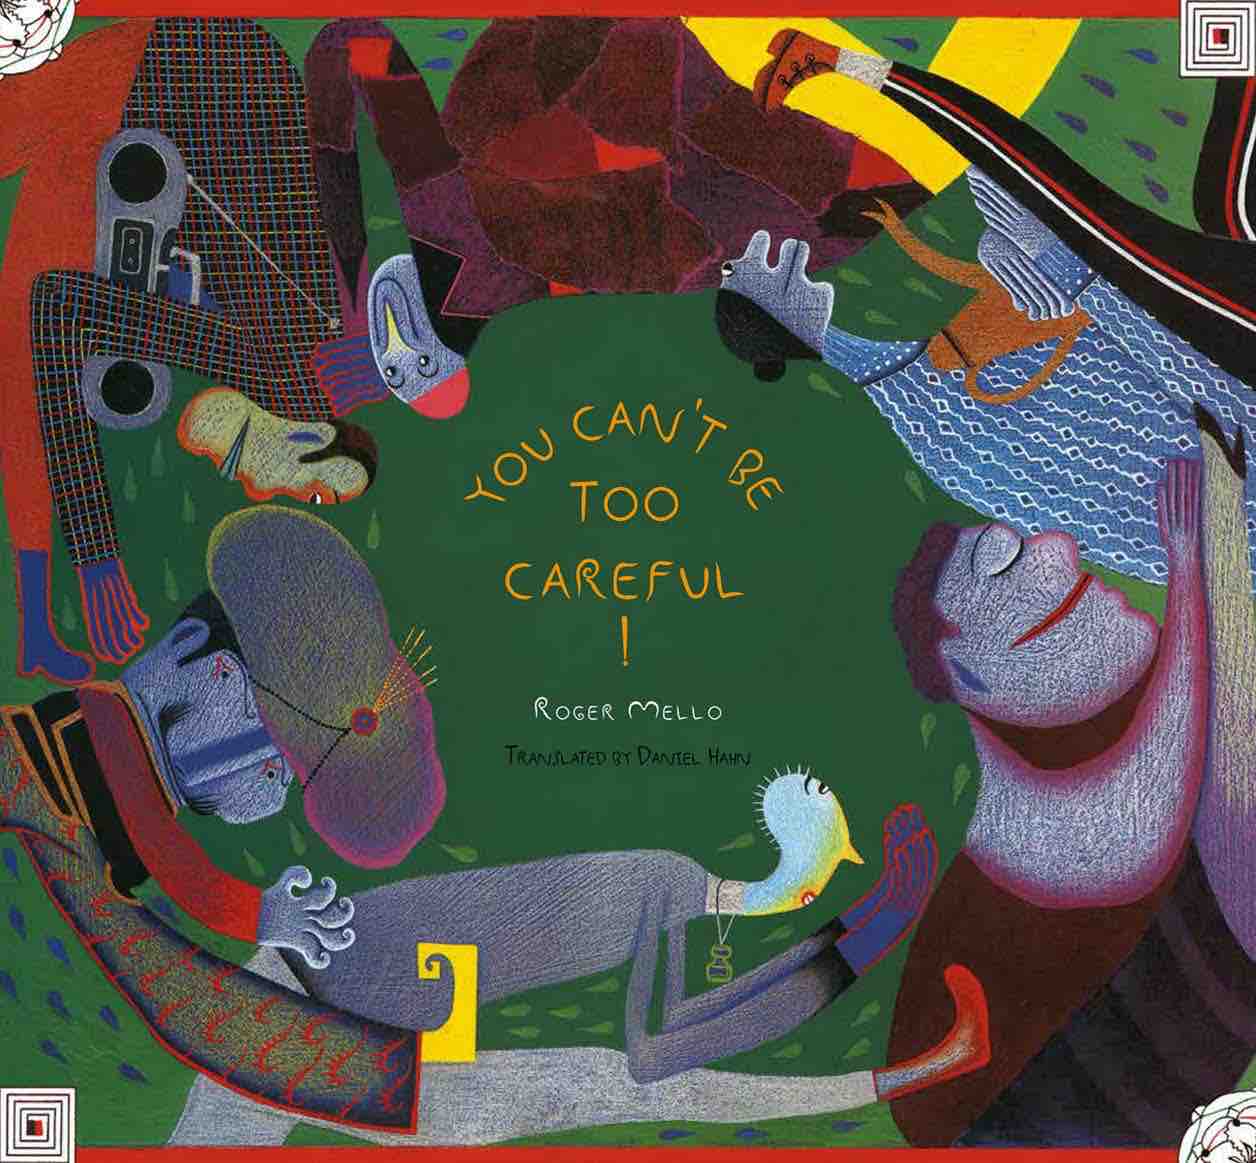 Cover for You Can't Be Too Careful featuring a stylized illustration of a series of human-like characters walking in a circle surrounding the cover's title on a dark green background.